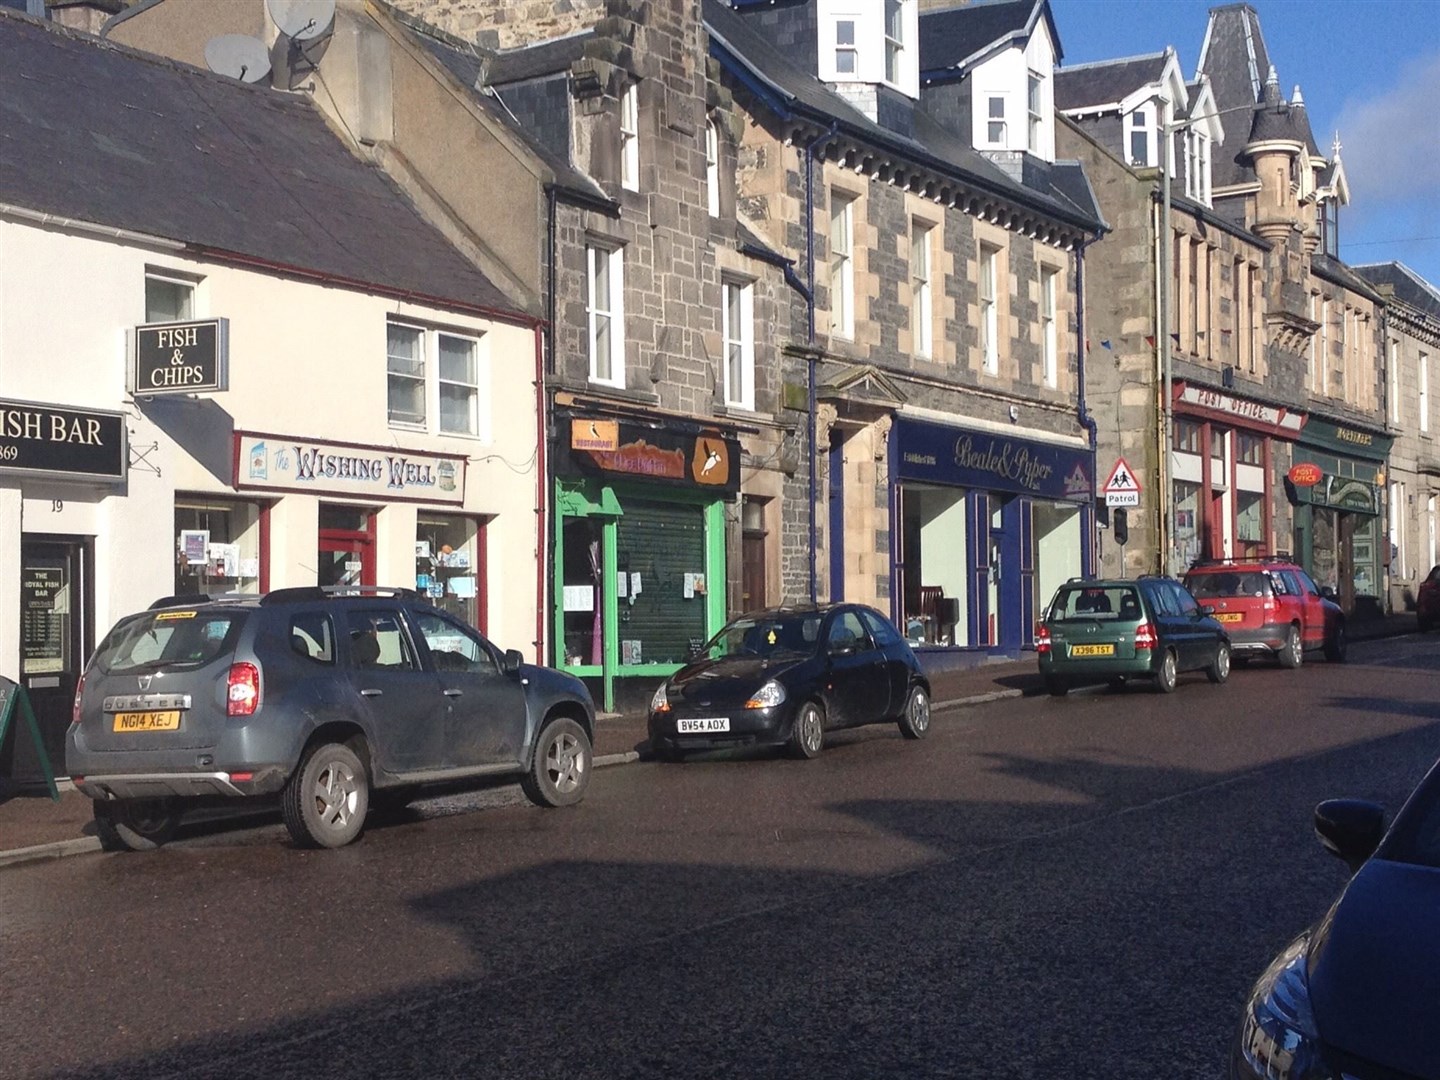 Grantown High Street.... residents are being encouraged to shop local after 14 weeks of closure for most retailers.